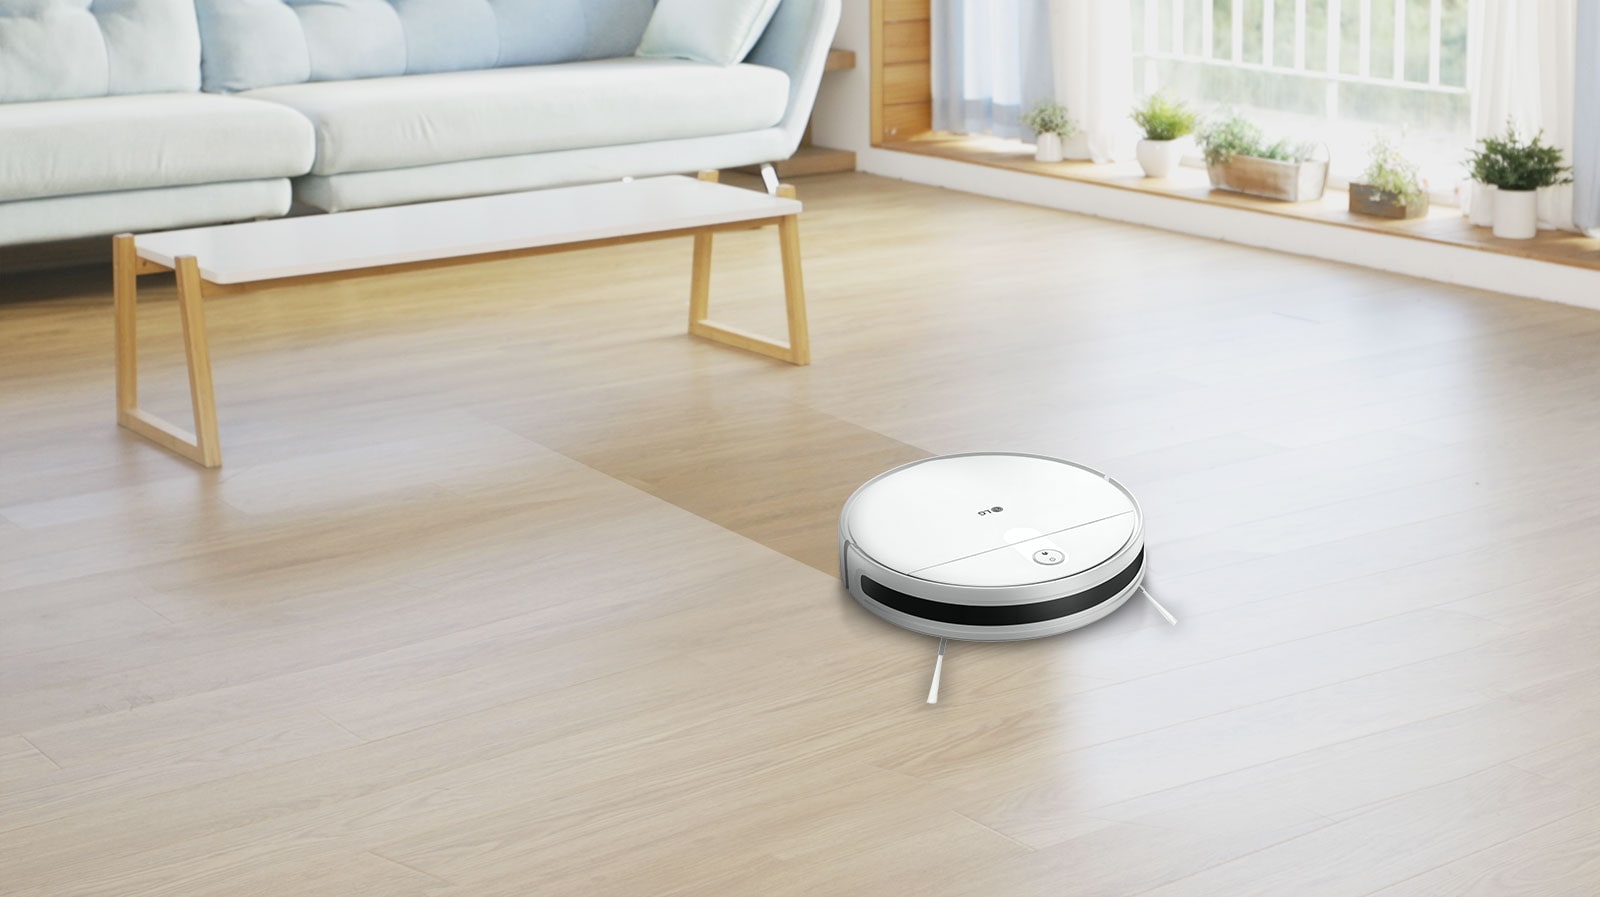 Vacuum and mop functions operate simultaneously, helping you save time